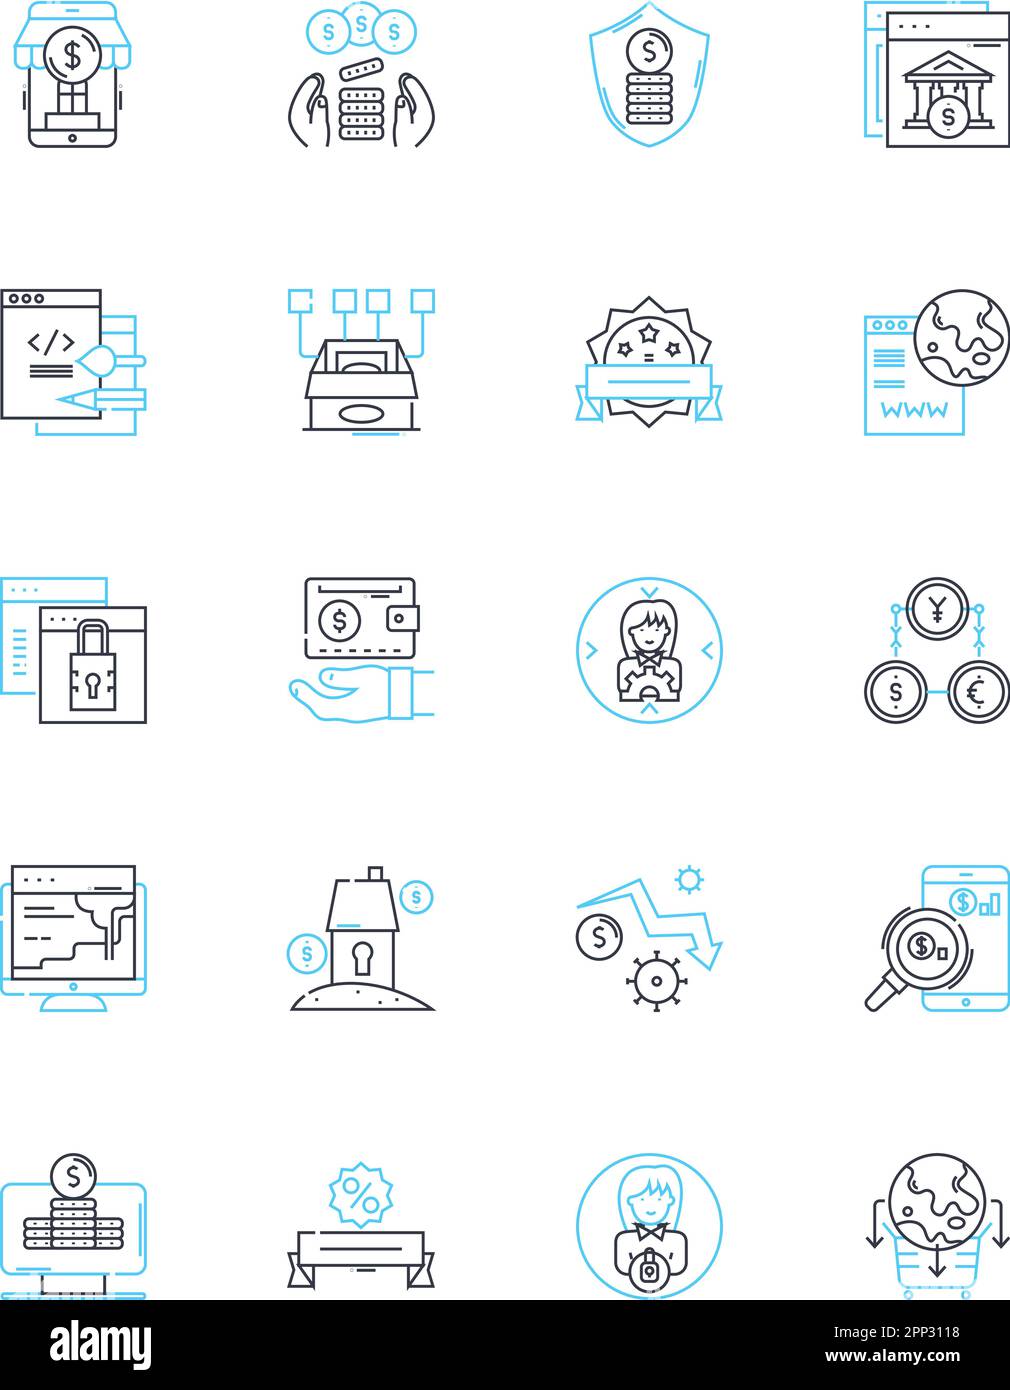 Trading platform linear icons set. Interface, Functionality, User-friendly, Efficiency, Execution, Orderflow, Charting line vector and concept signs Stock Vector